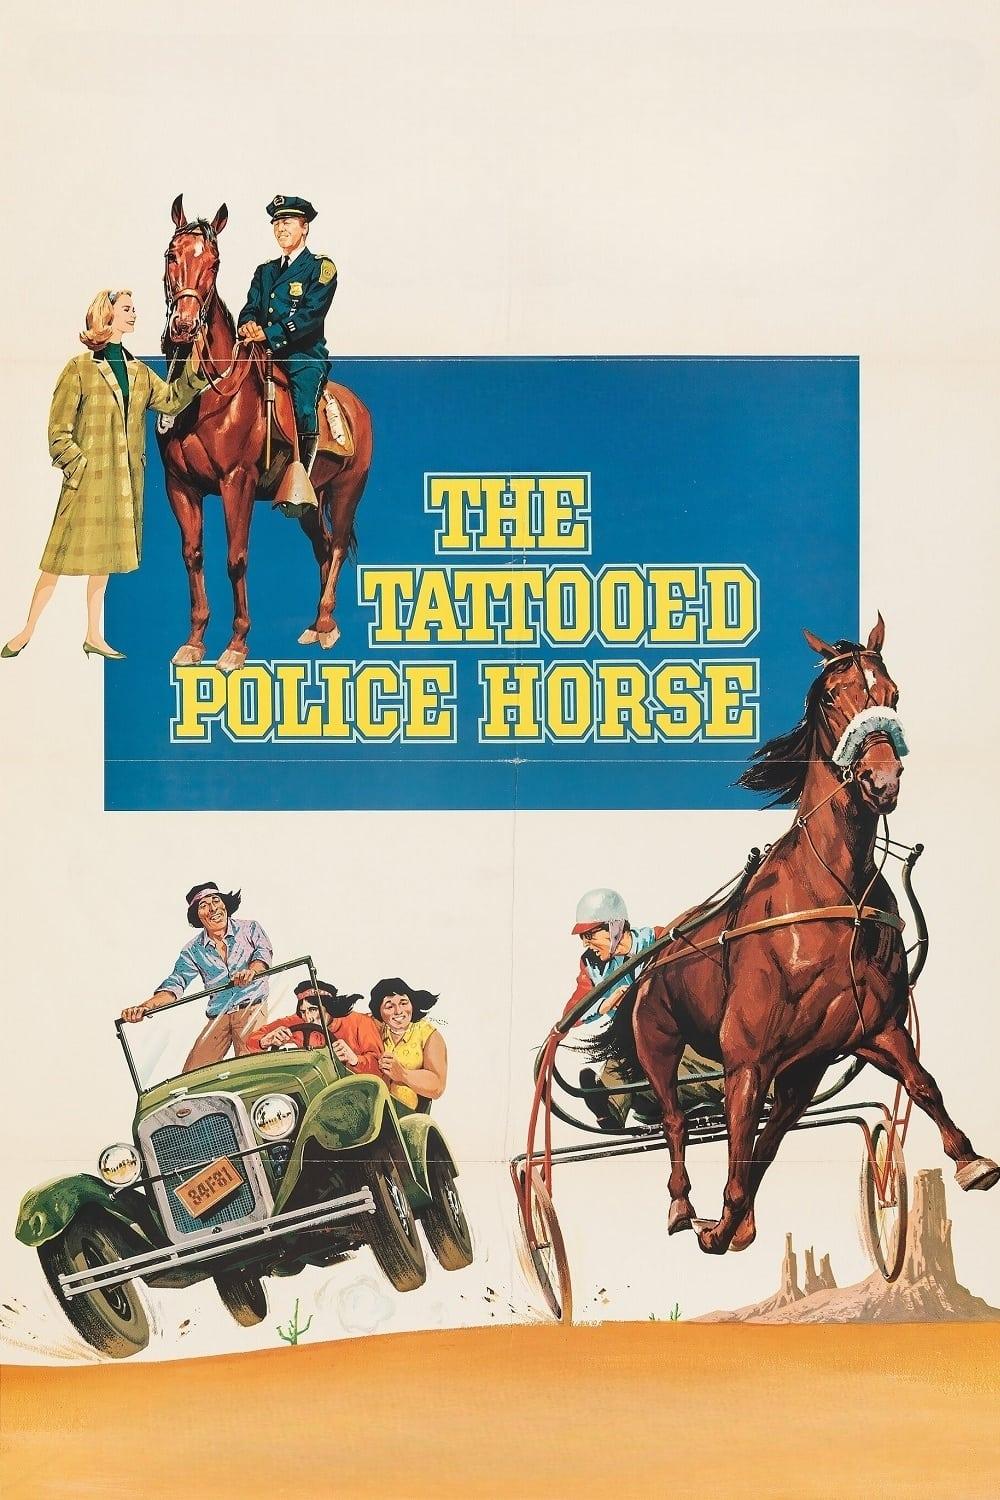 The Tattooed Police Horse poster